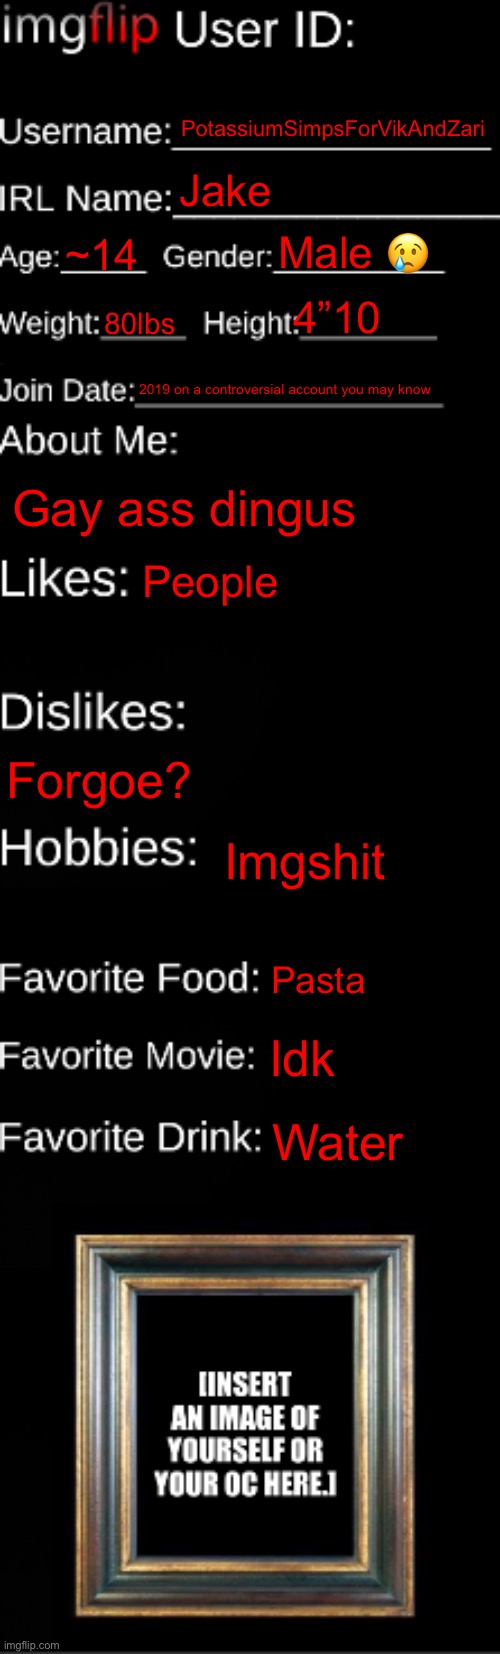 imgflip ID Card | PotassiumSimpsForVikAndZari; Jake; Male 😢; ~14; 4”10; 80lbs; 2019 on a controversial account you may know; Gay ass dingus; People; Forgoe? Imgshit; Pasta; Idk; Water | image tagged in imgflip id card | made w/ Imgflip meme maker